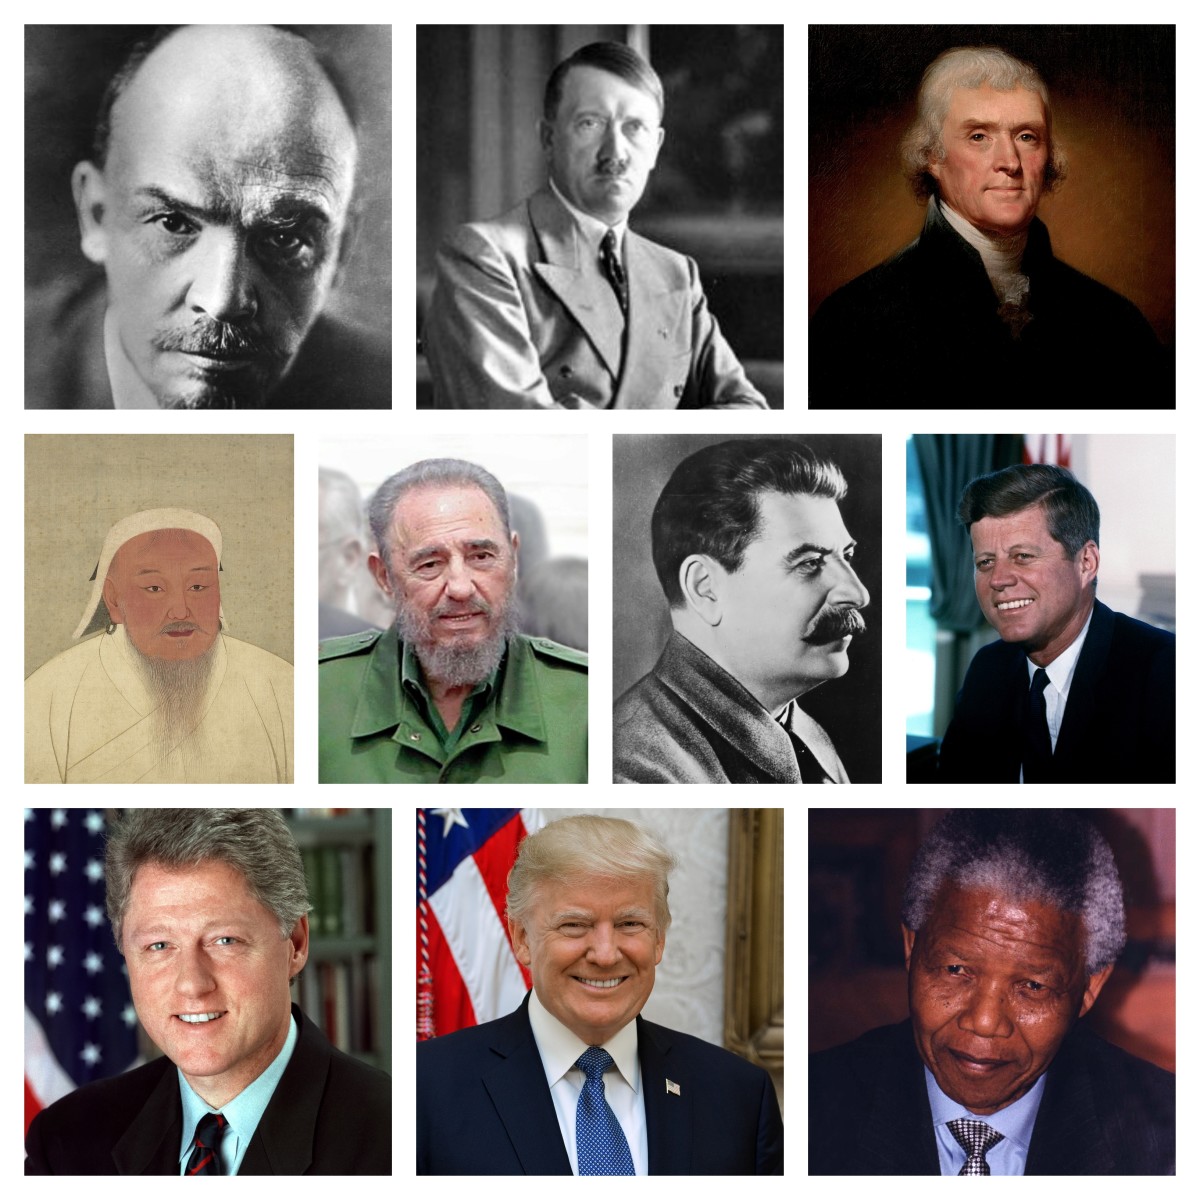 Leaders—both Presidents and dictators—have significant first-hand insight on topics such as justice, revolution, leadership, government, and the human condition. Who said what can be surprising sometimes.